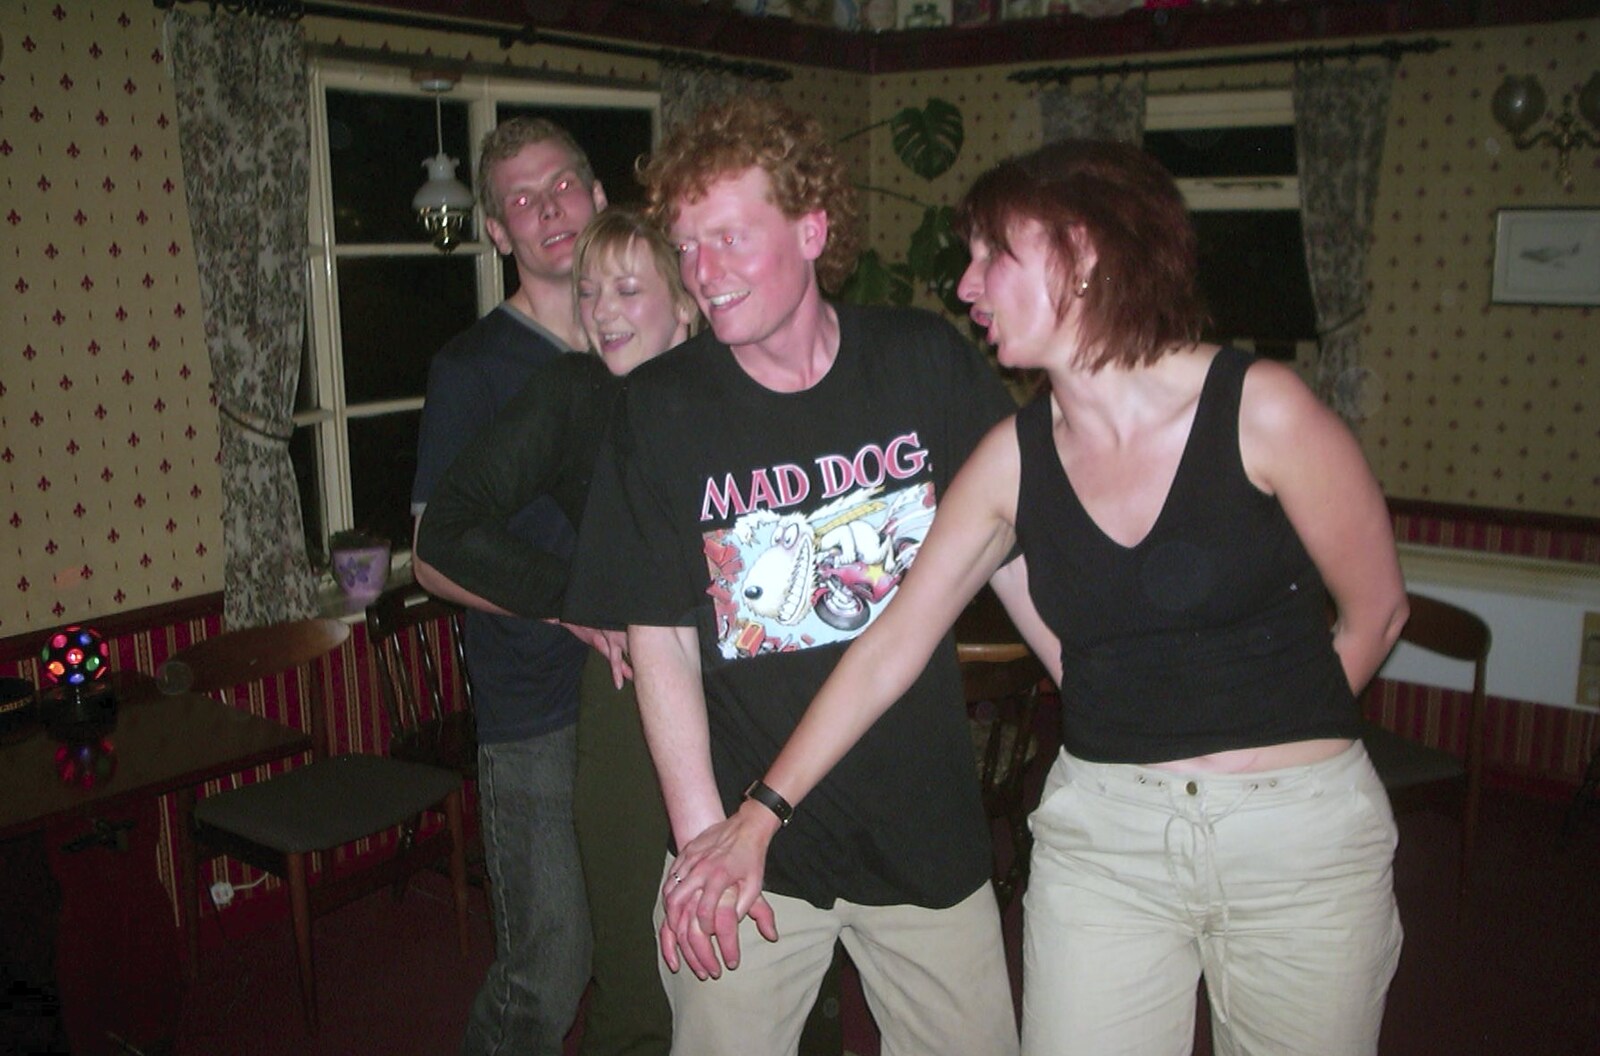 Neil's 30th Birthday at the Swan Inn, Brome, Suffolk - 5th April 2003: More dancing